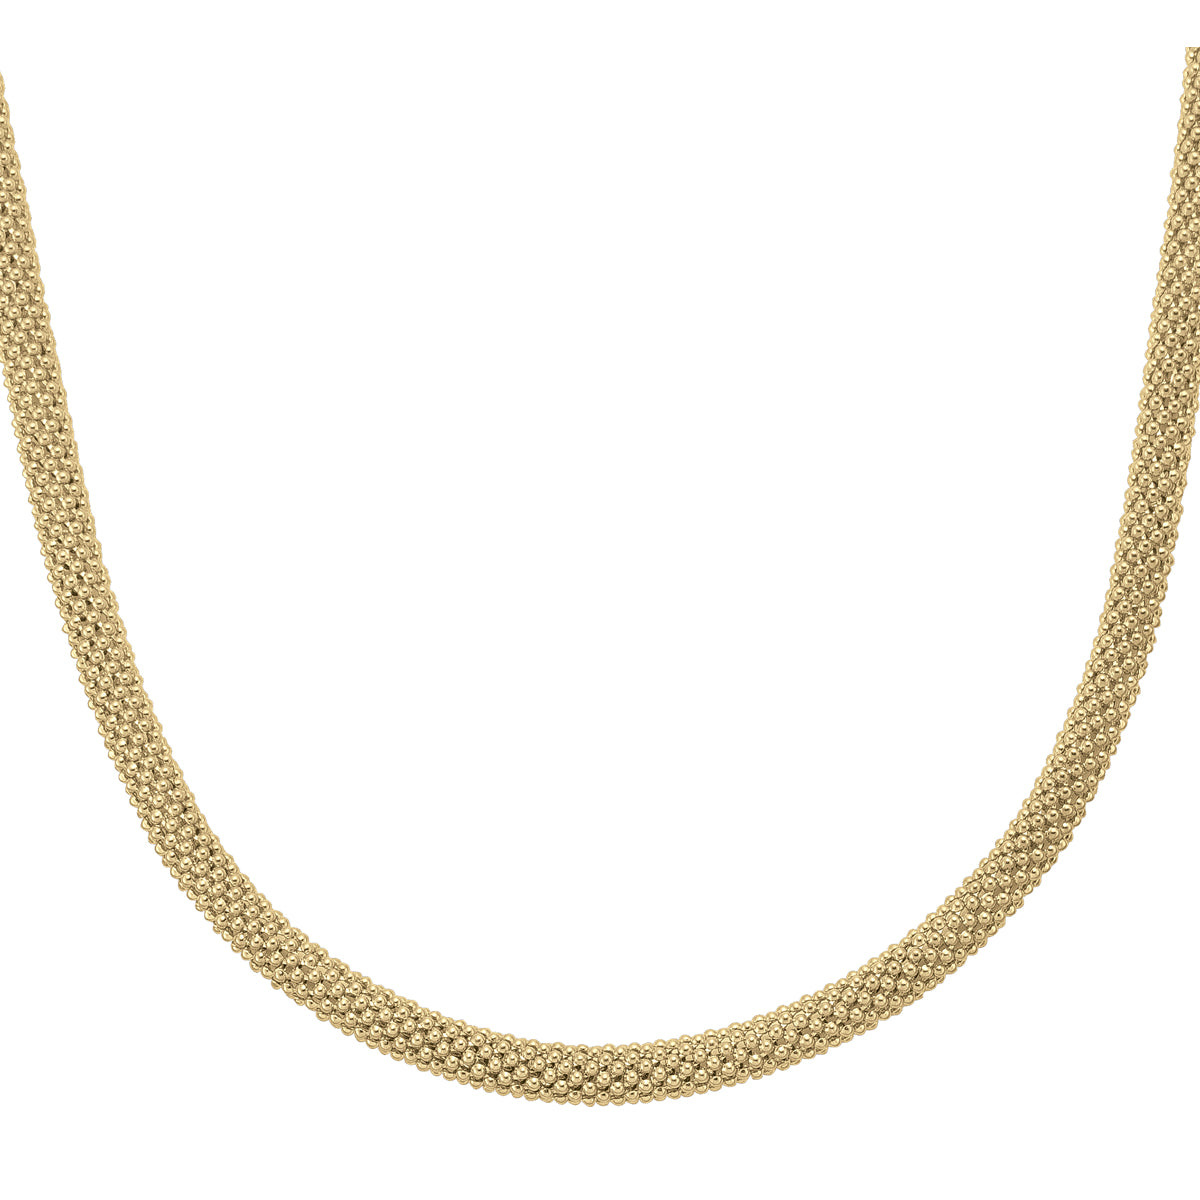 Bold Round Mesh Link Chain in 14K Yellow Gold